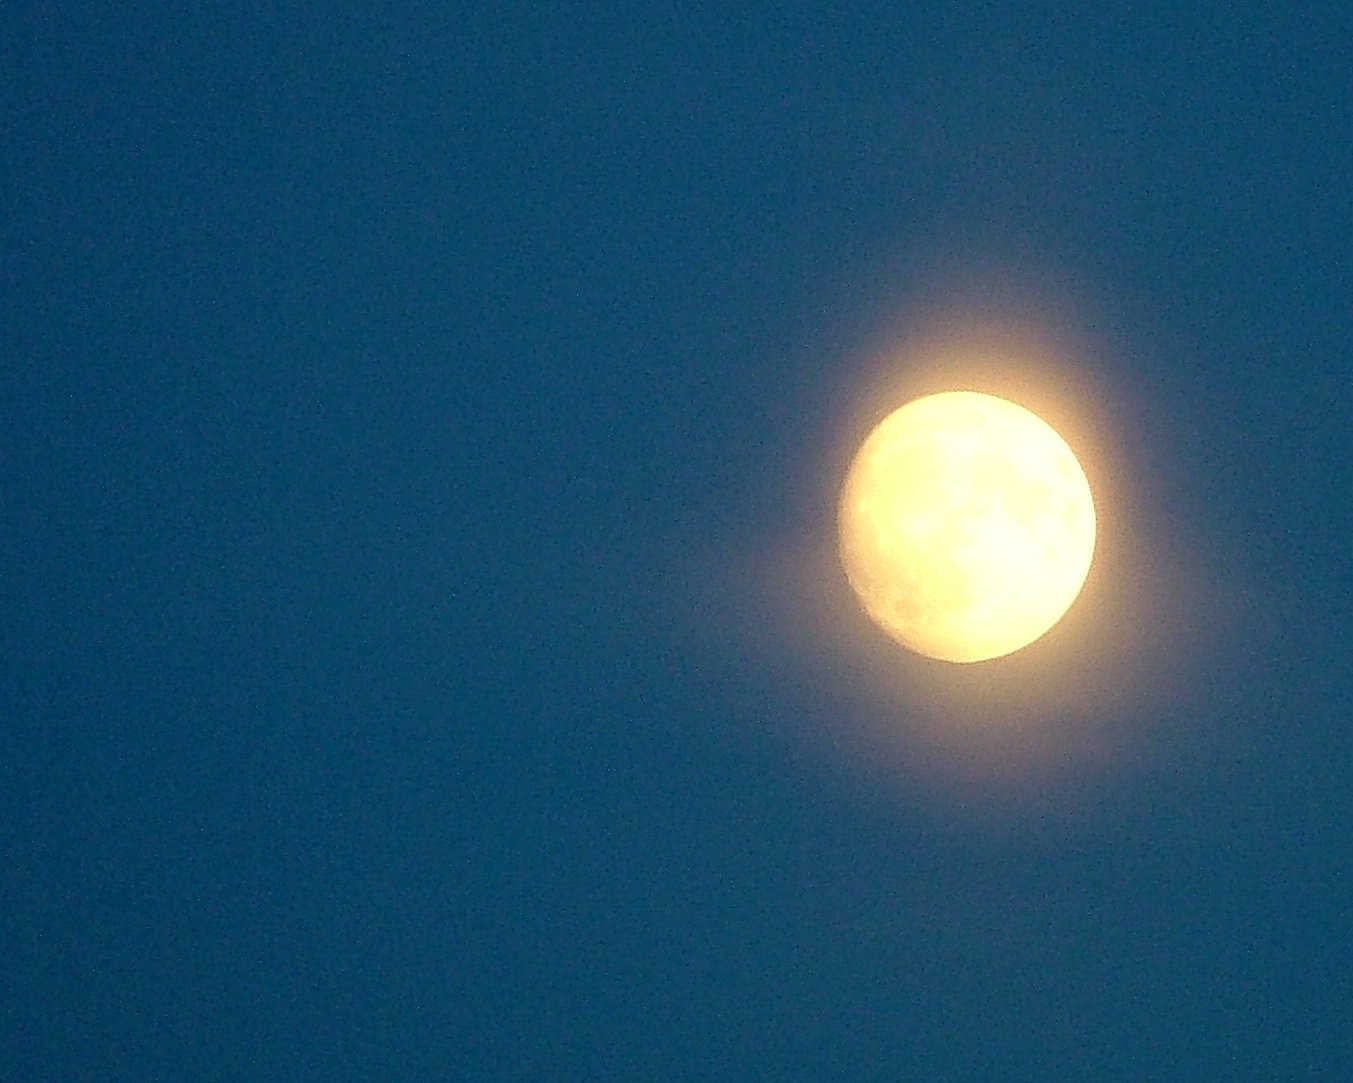 the moon, a clear, yellow glow against a blue sky